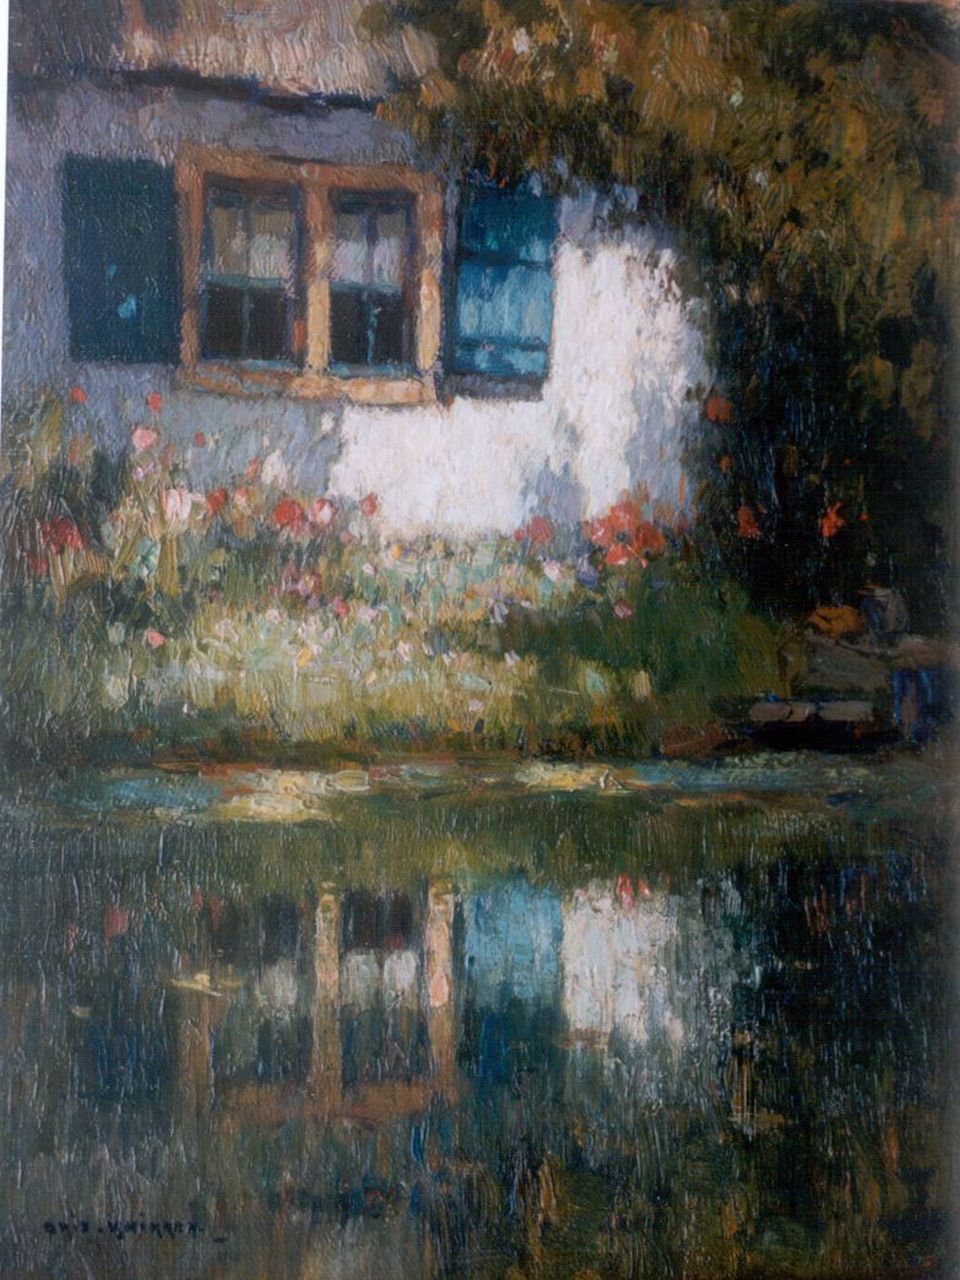 Knikker A.  | Aris Knikker, A farm by a stream, oil on canvas laid down on panel 24.0 x 18.0 cm, signed l.l.